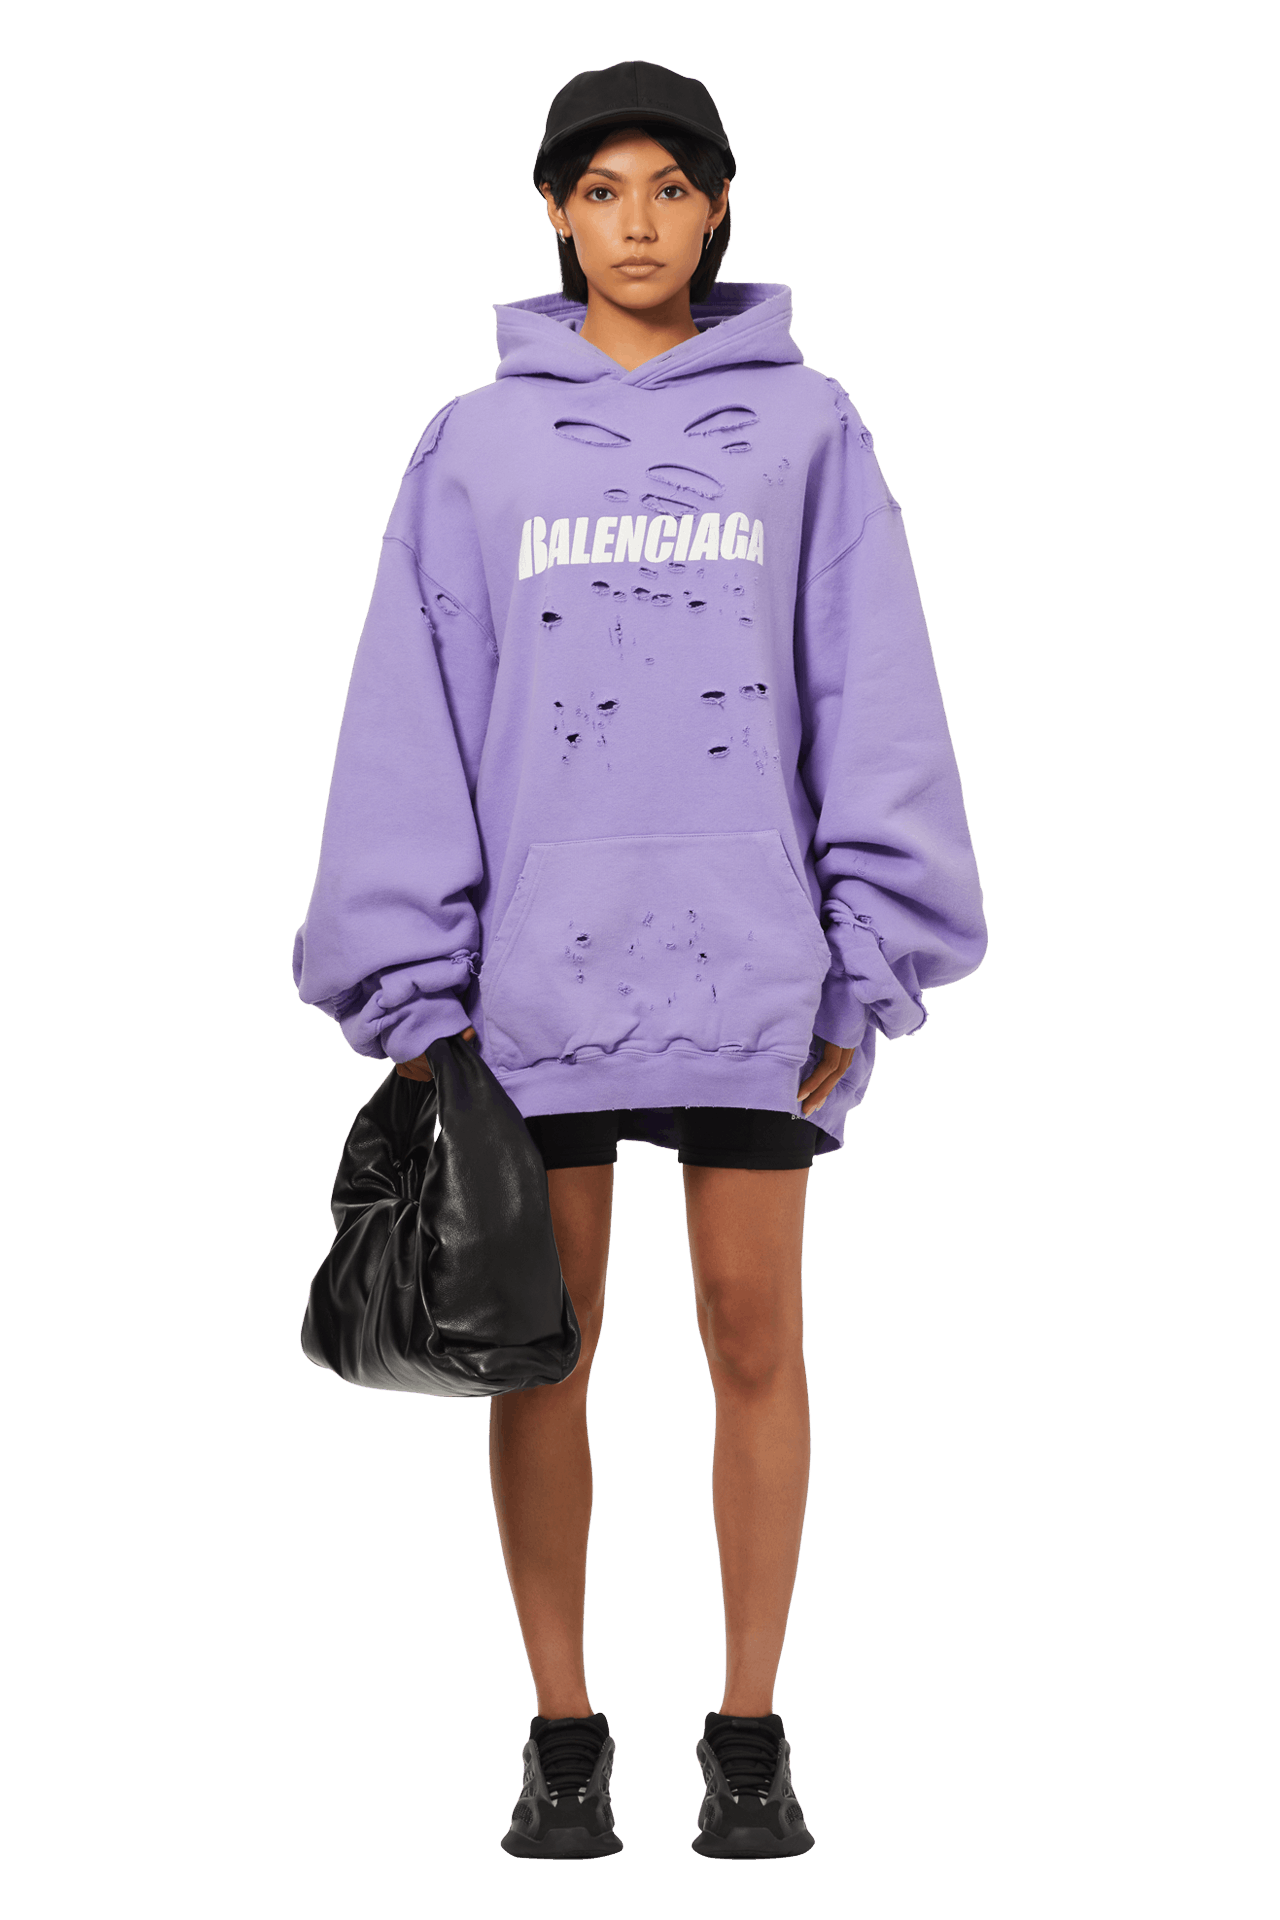 Distressed Fashionistas may be at Balenciagas 1350 holey hoodie